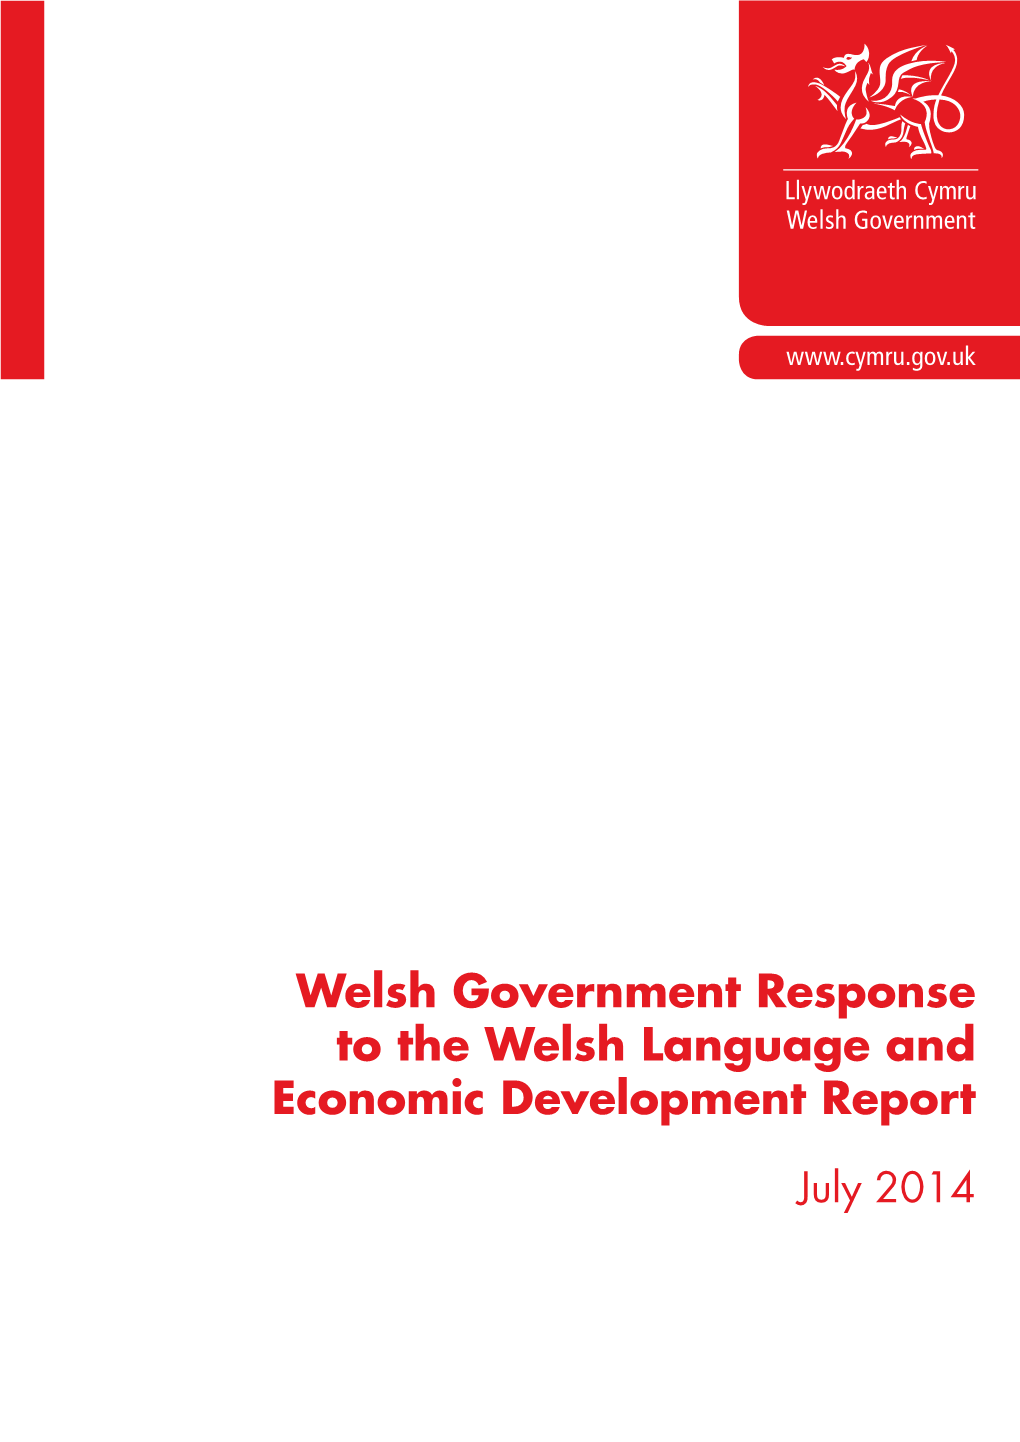 Welsh Government Response to the Welsh Language and Economic Development Report